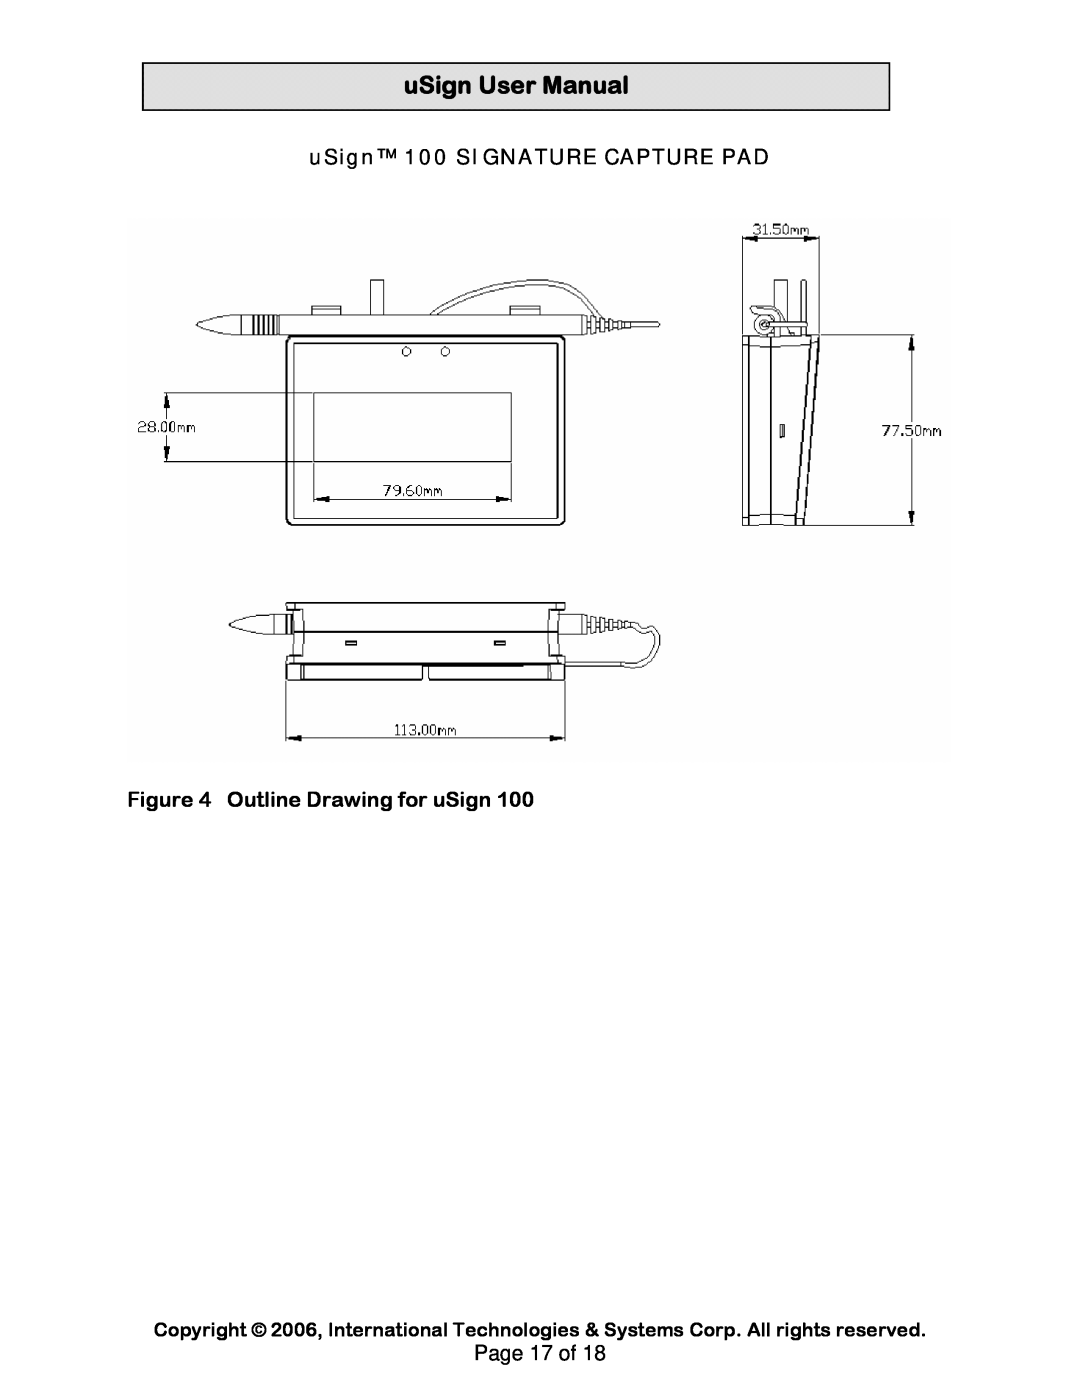 Compaq uSign 200 user manual uSign 100 SIGNATURE CAPTURE PAD, Outline Drawing for uSign, uSignUserManual 